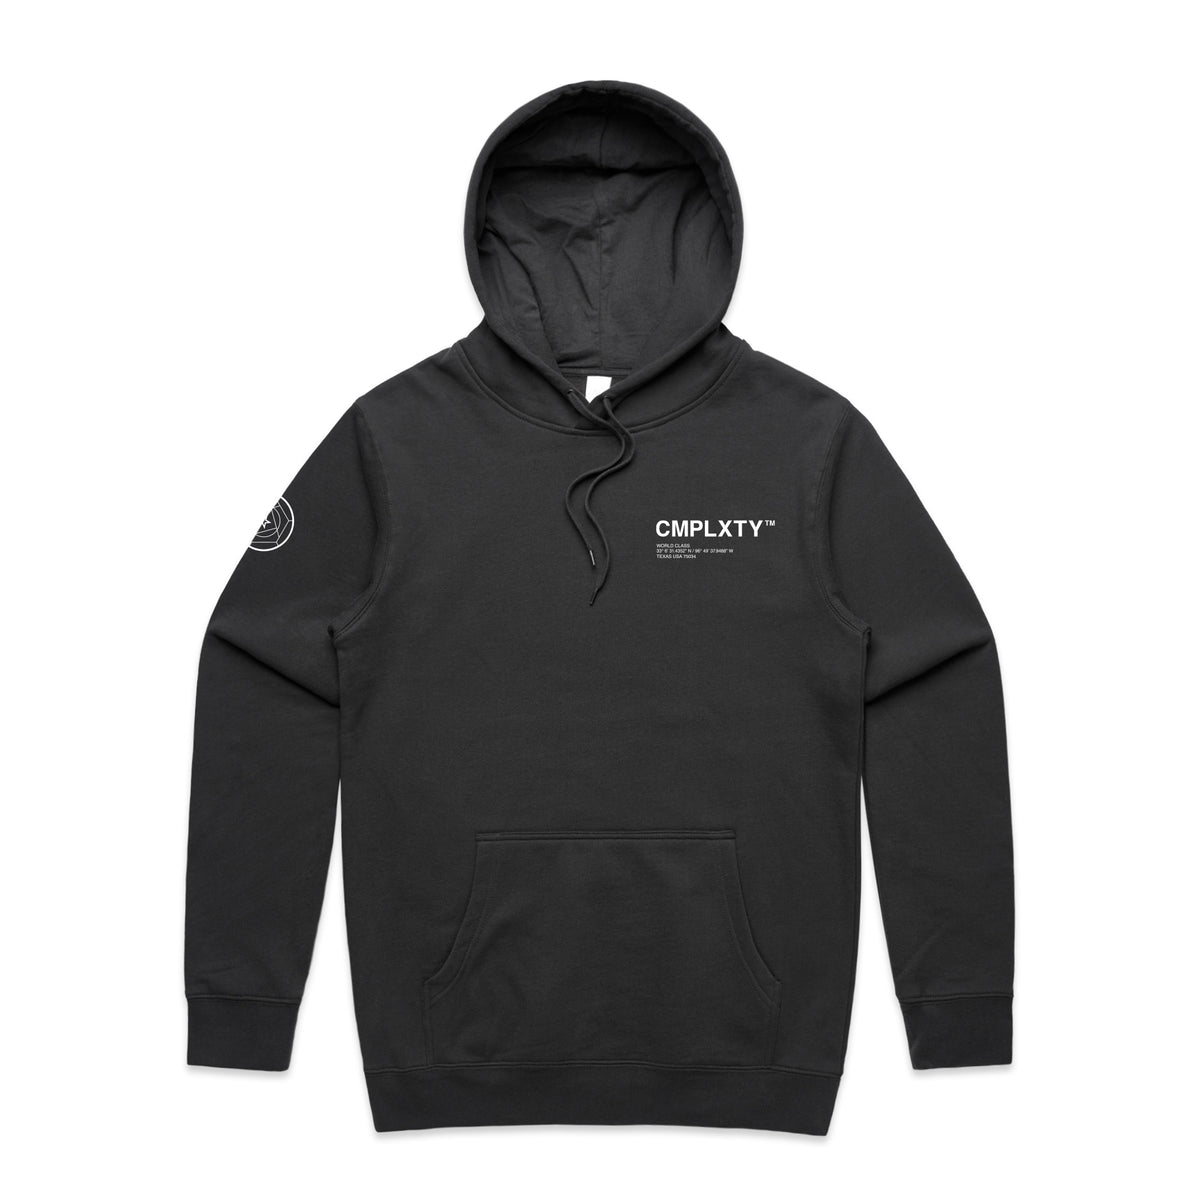 Complexity Trademarked Hoodie